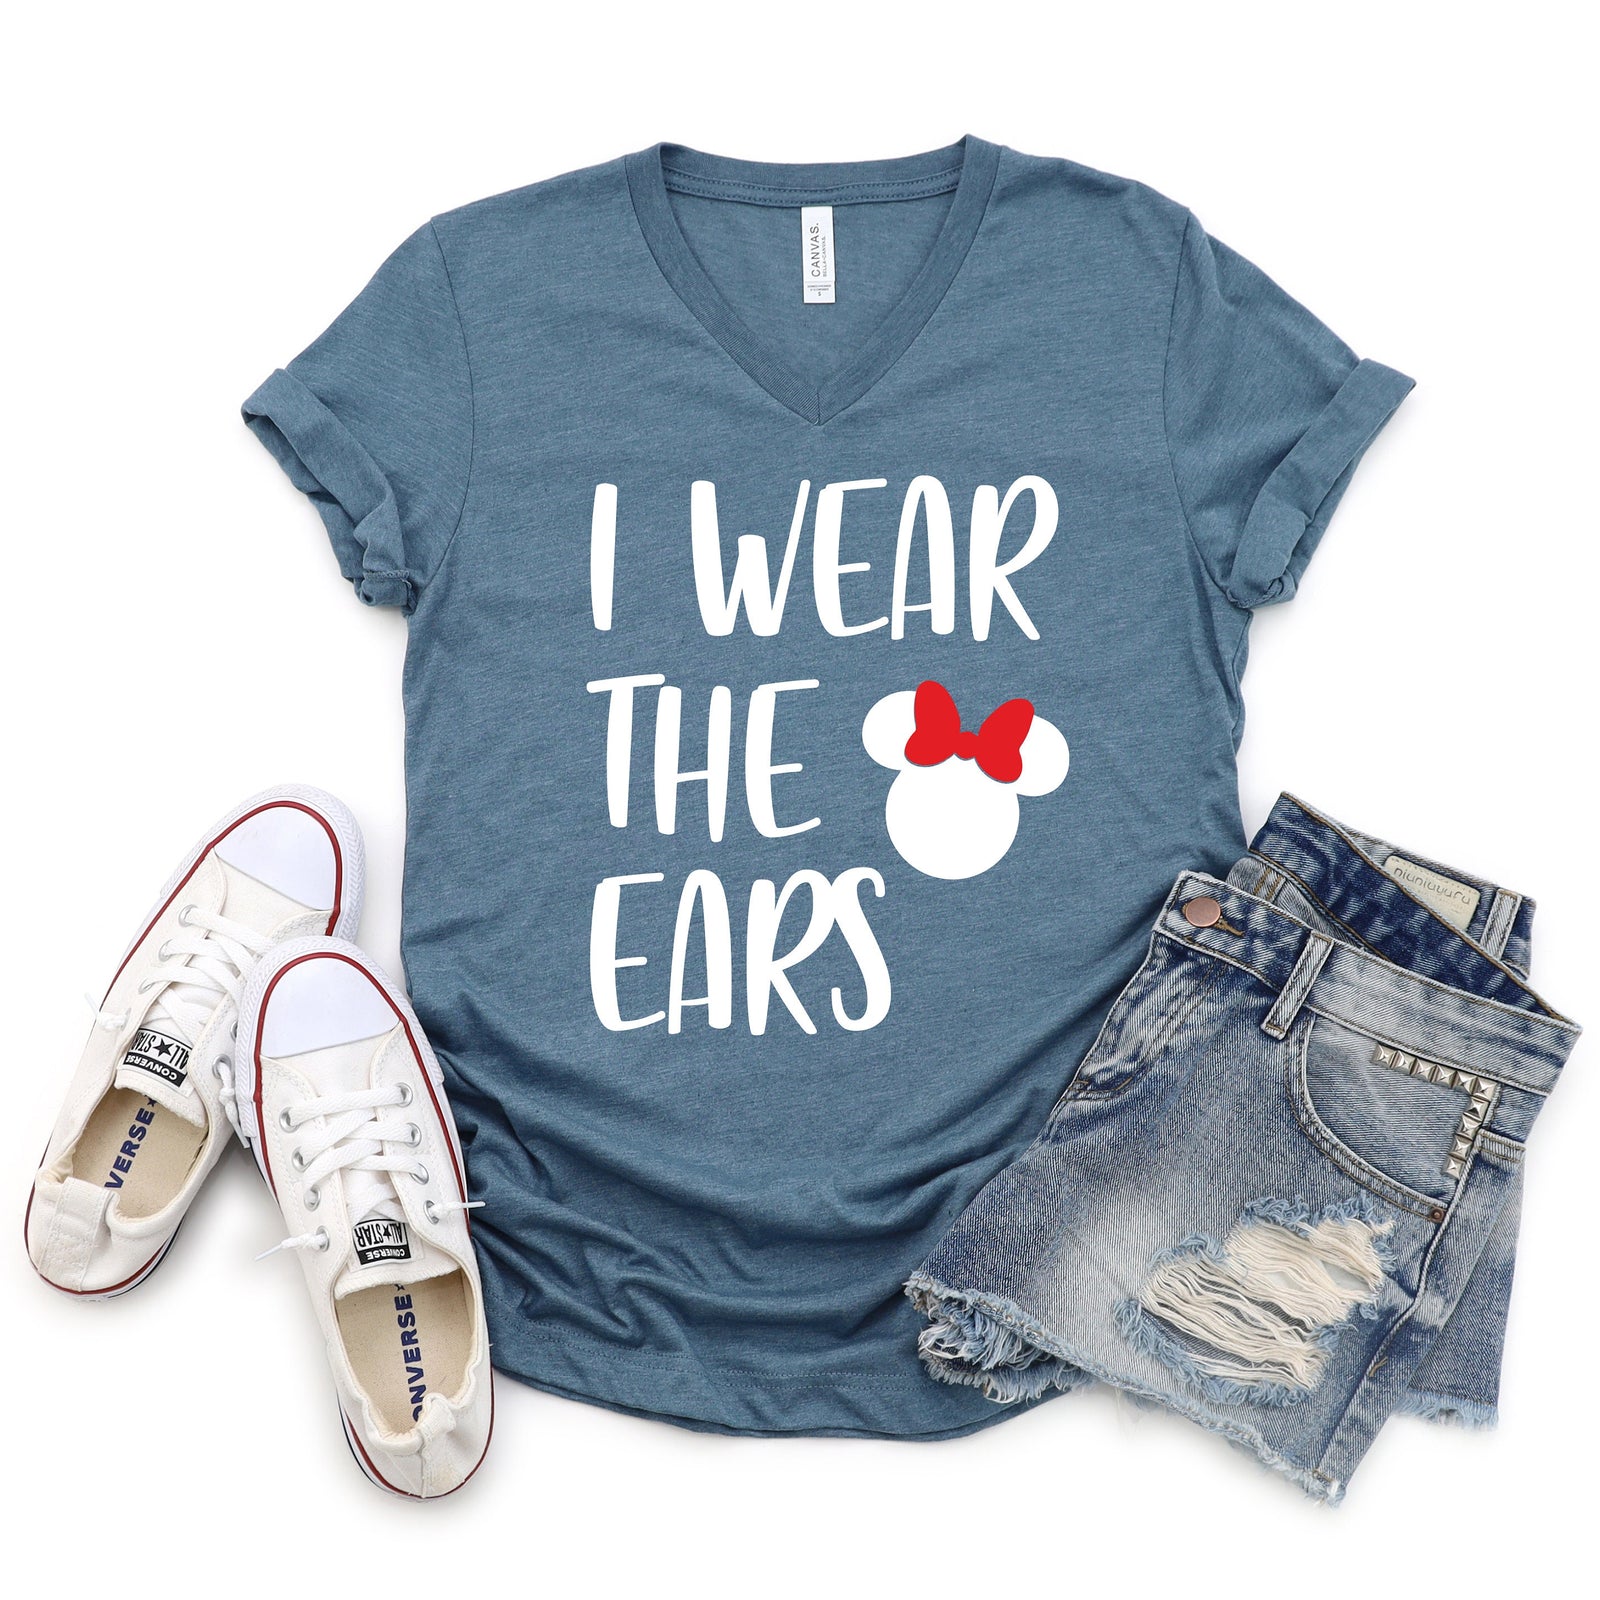 I wear the Ears and I Buy the Beers Matching Disney Couples Shirts - Minnie and Mickey Adult T Shirts